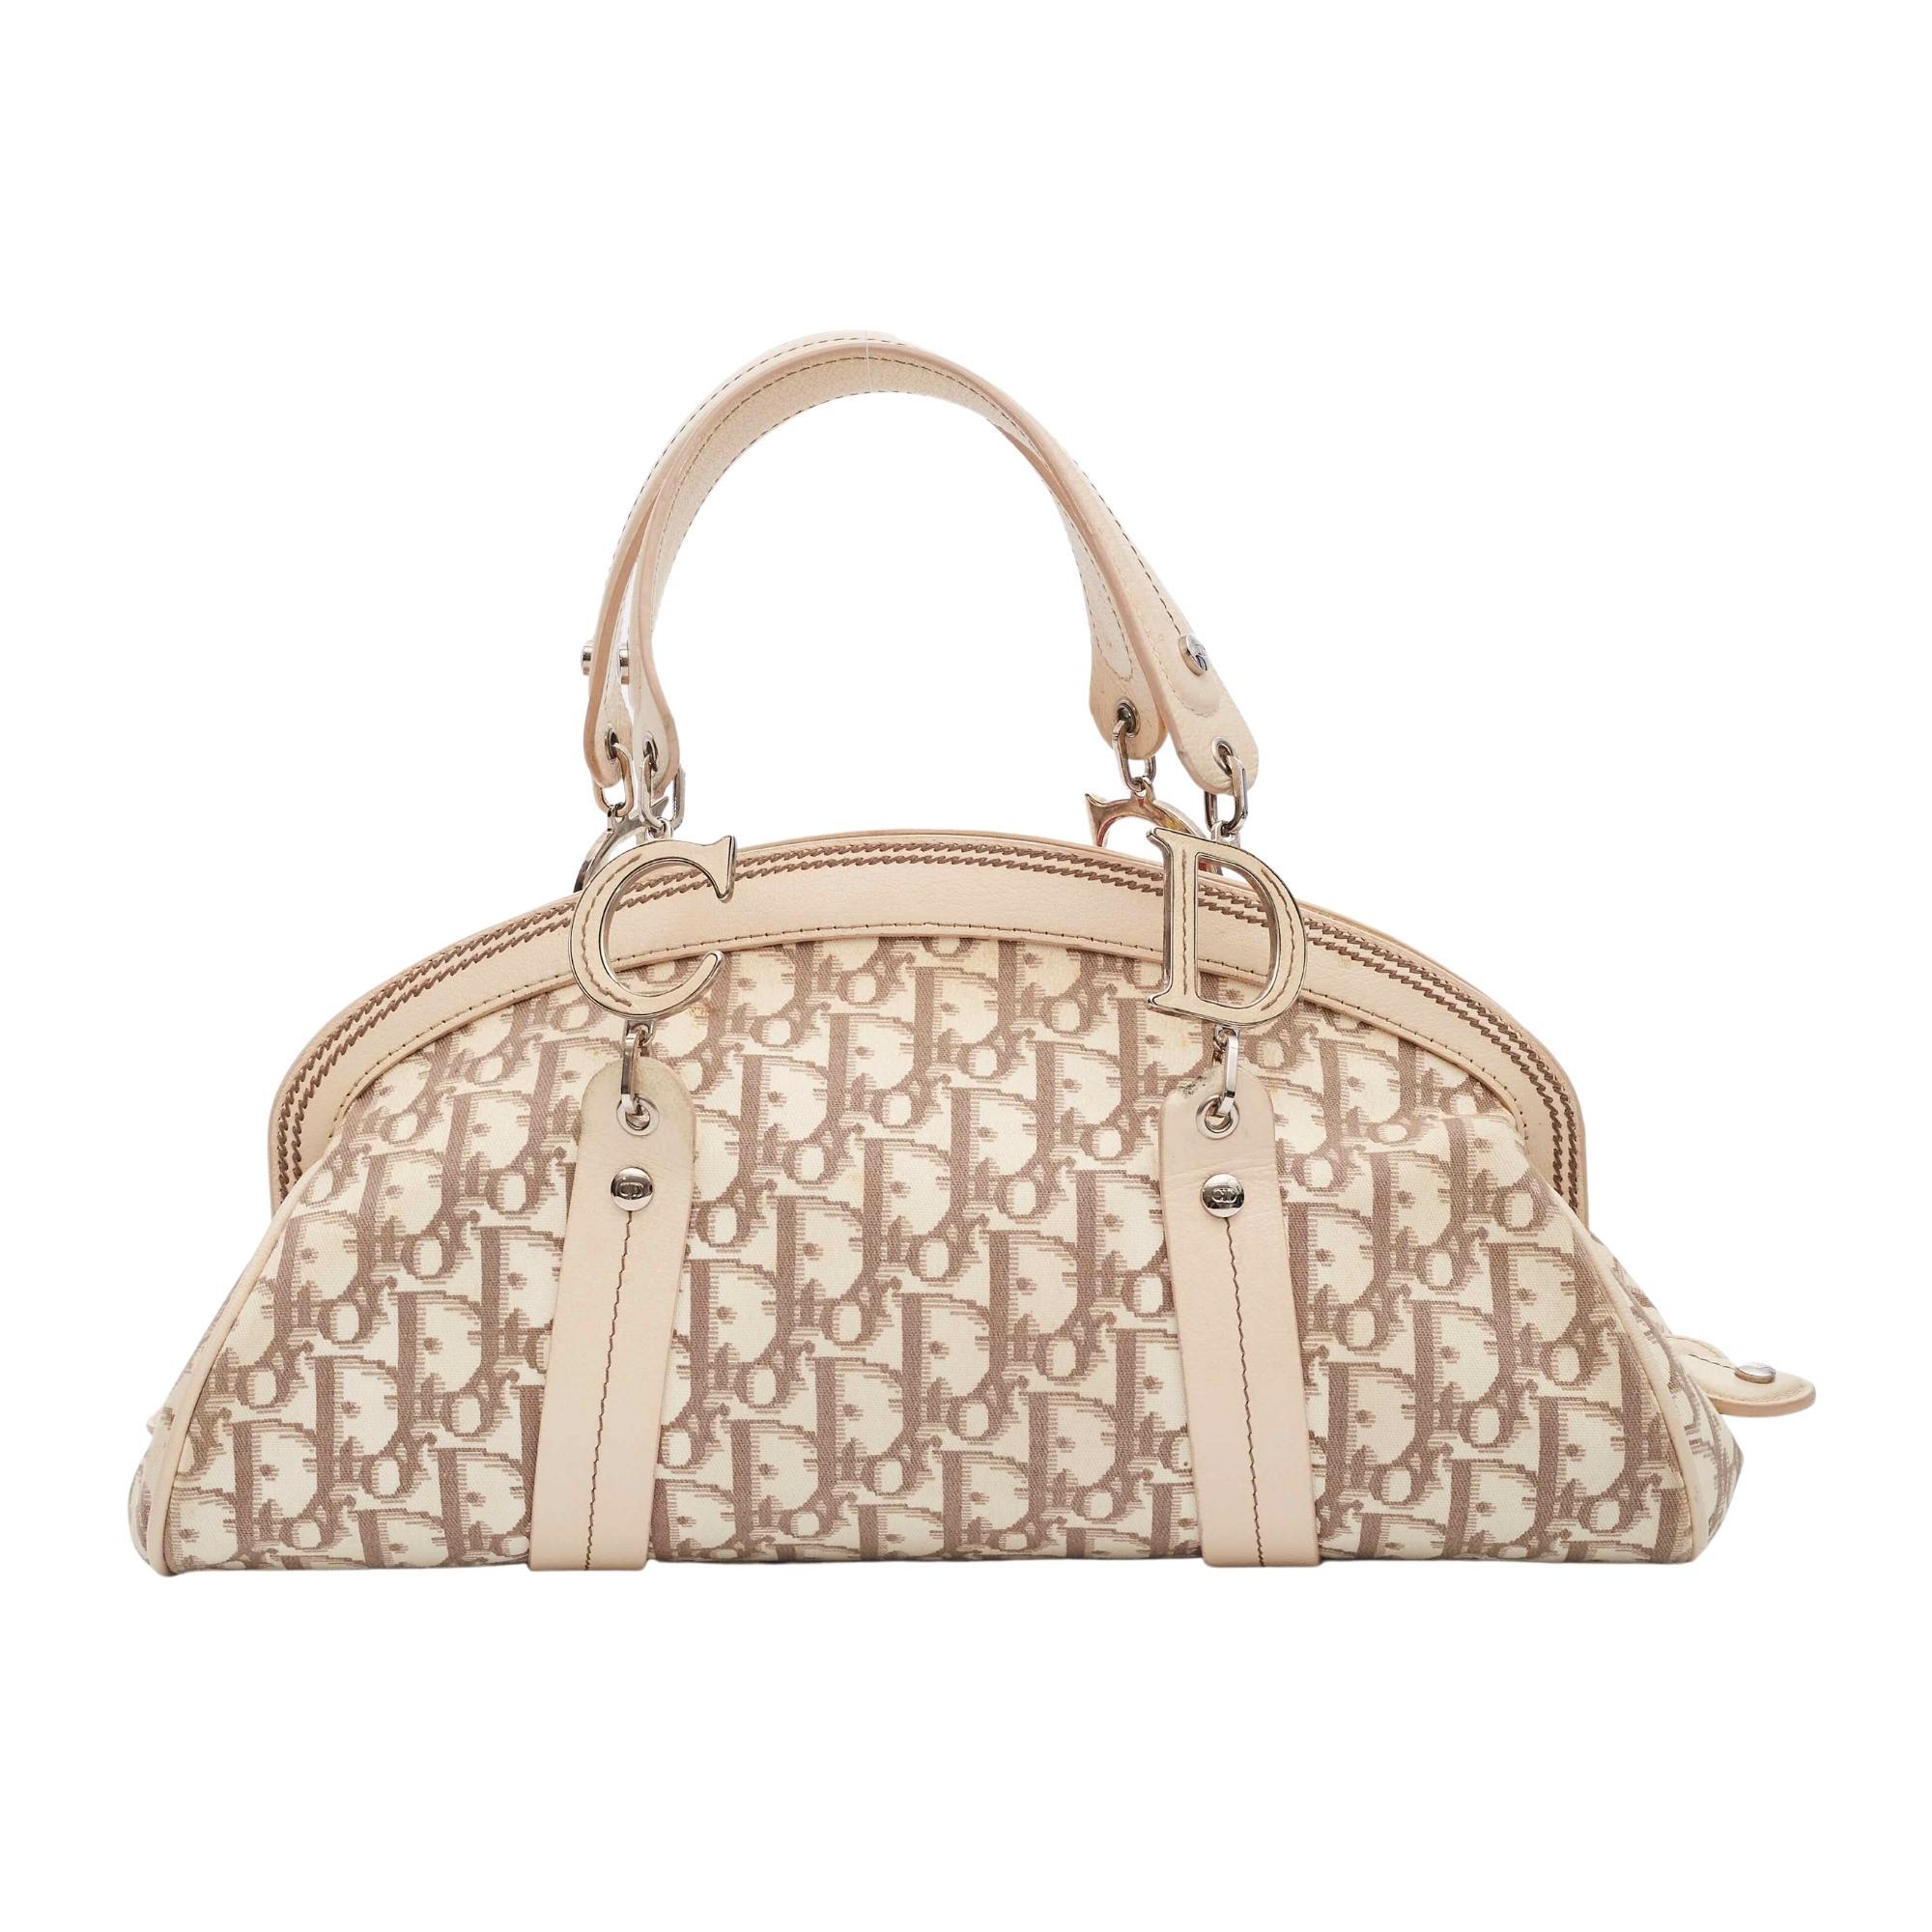 Ivory and taupe Diorissimo canvas Christian Dior vintage handle bag with silver-tone hardware, creme leather trim, dual flat handles featuring logo embellishments, multicolor embroidered 'Vintage Flowers' motif at front face, khaki nylon lining,